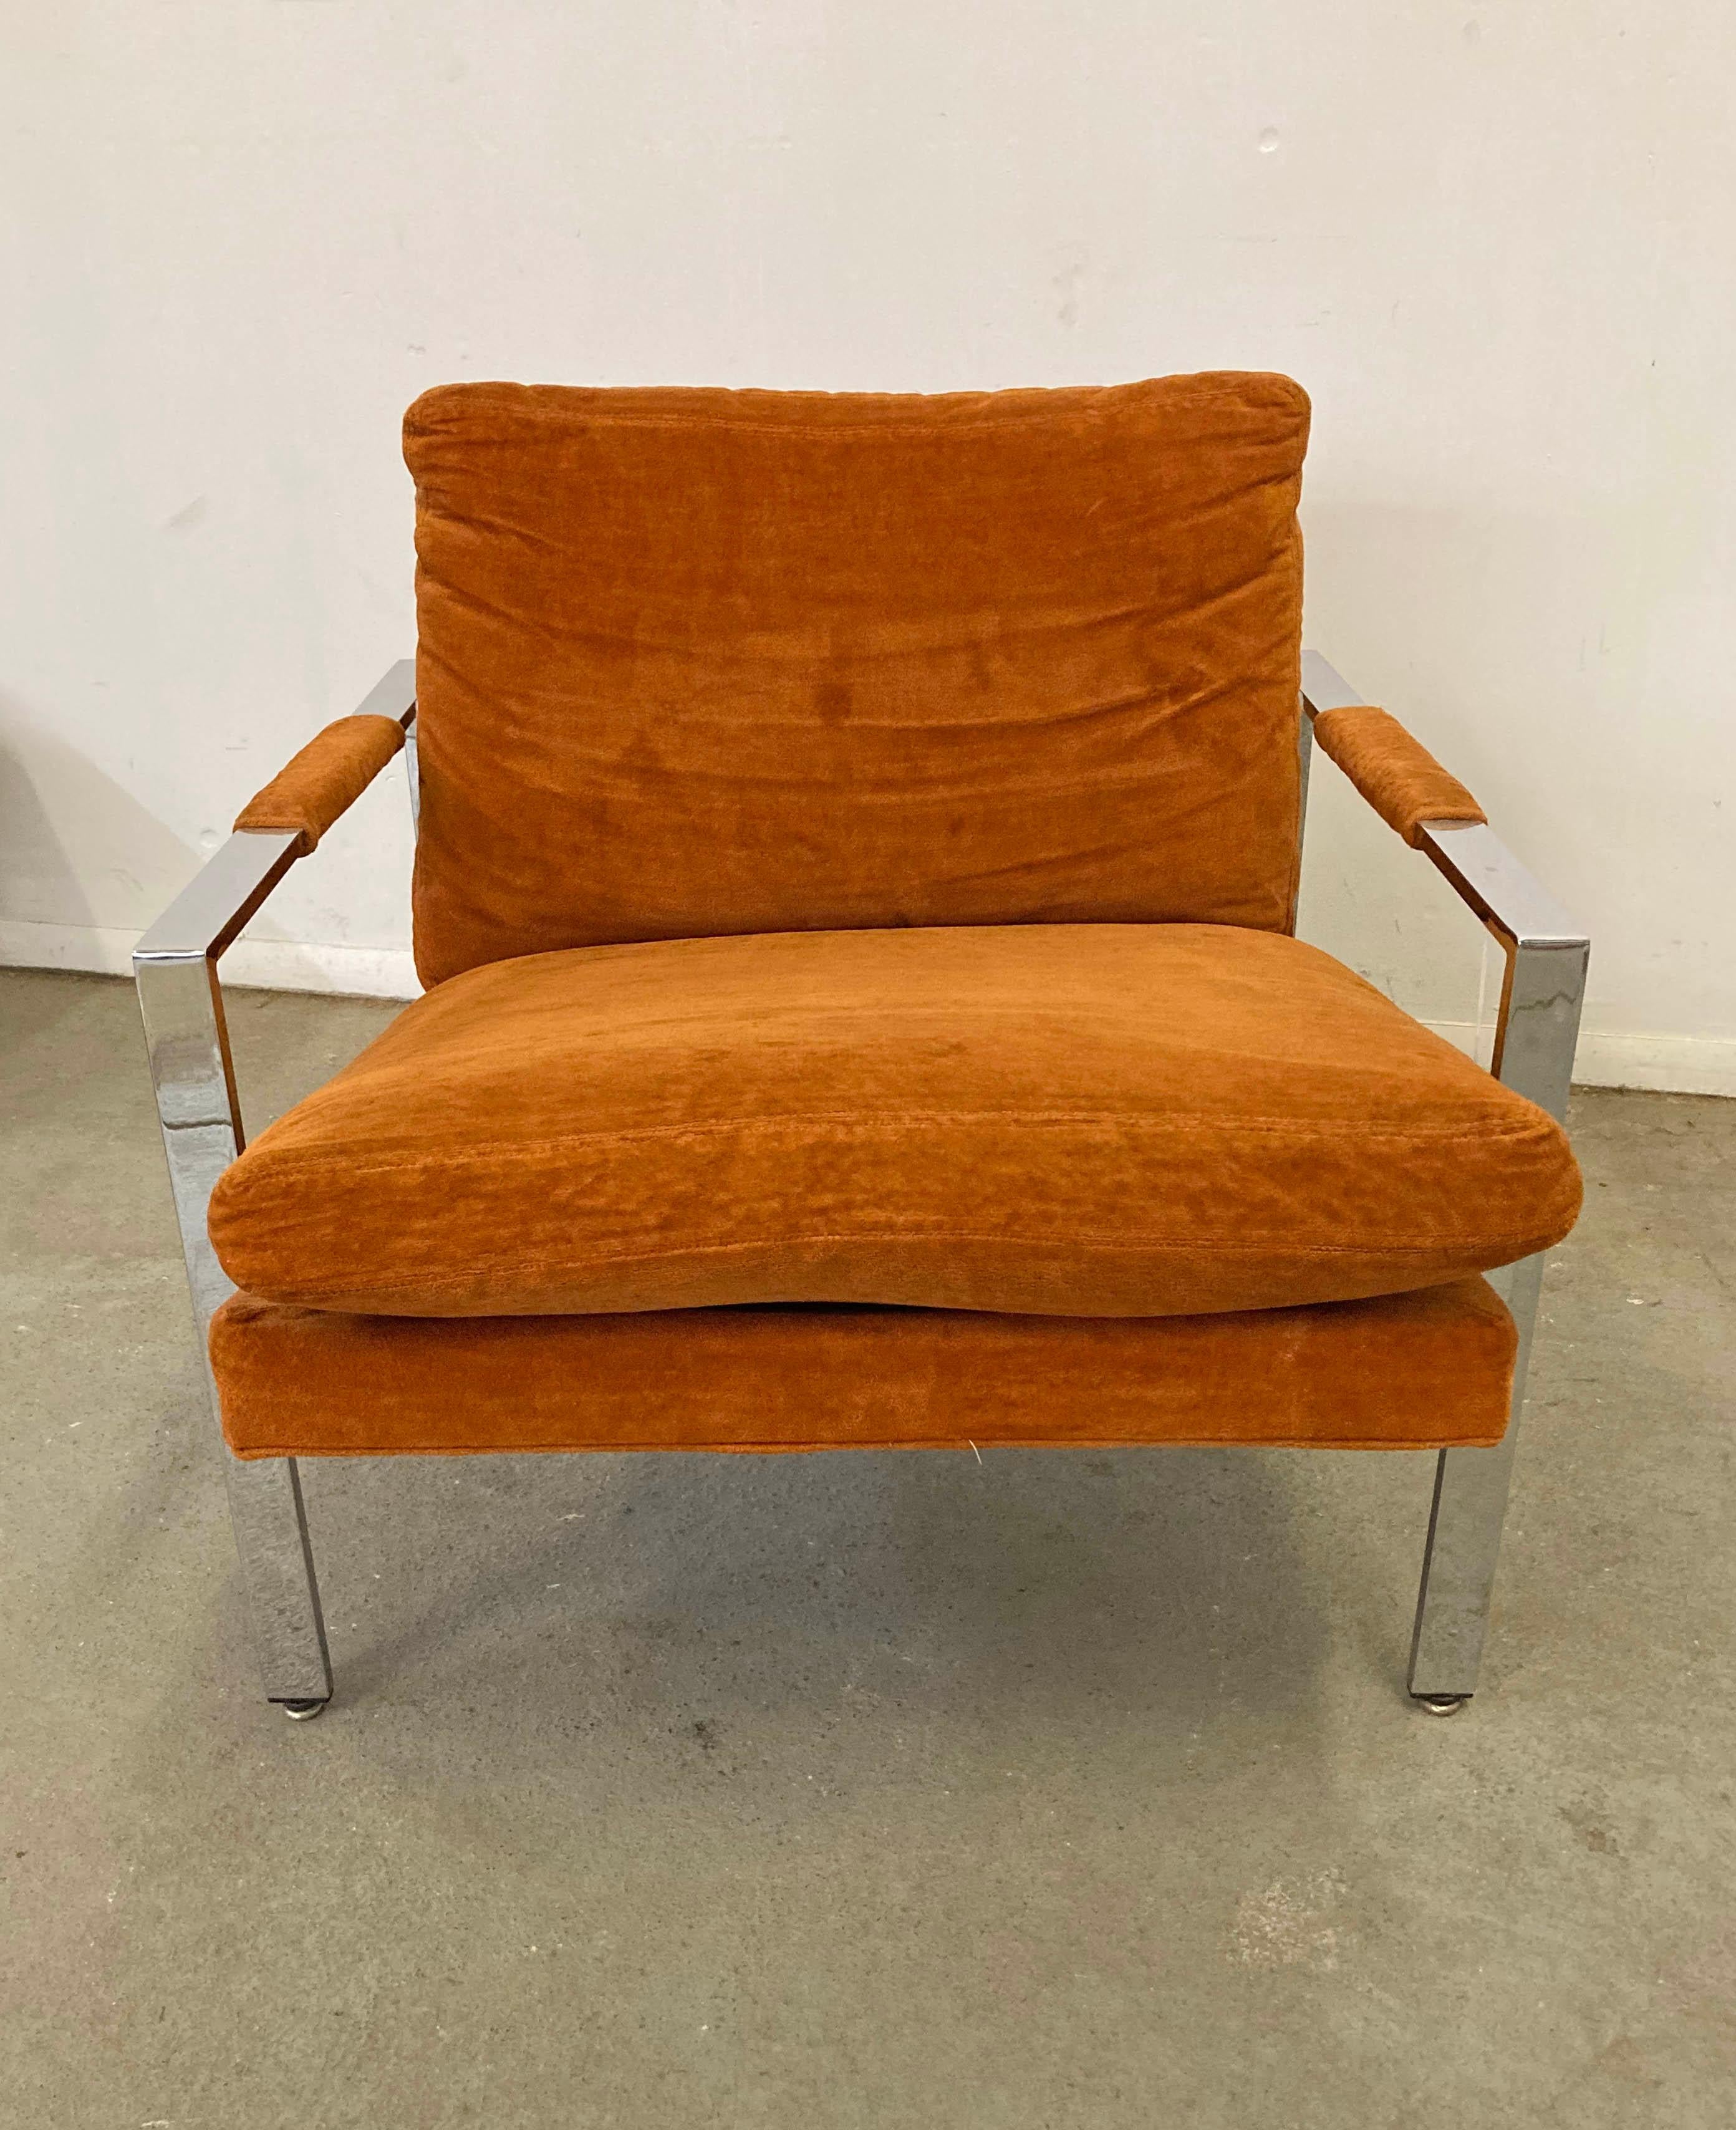 What a find. Offered is a vintage Mid-Century Modern lounge chair, designed by Milo Baughman for Thayer Coggin. This piece has a chrome base with orange velvet upholstery. It is in vintage condition showing some age wear including slight stains on